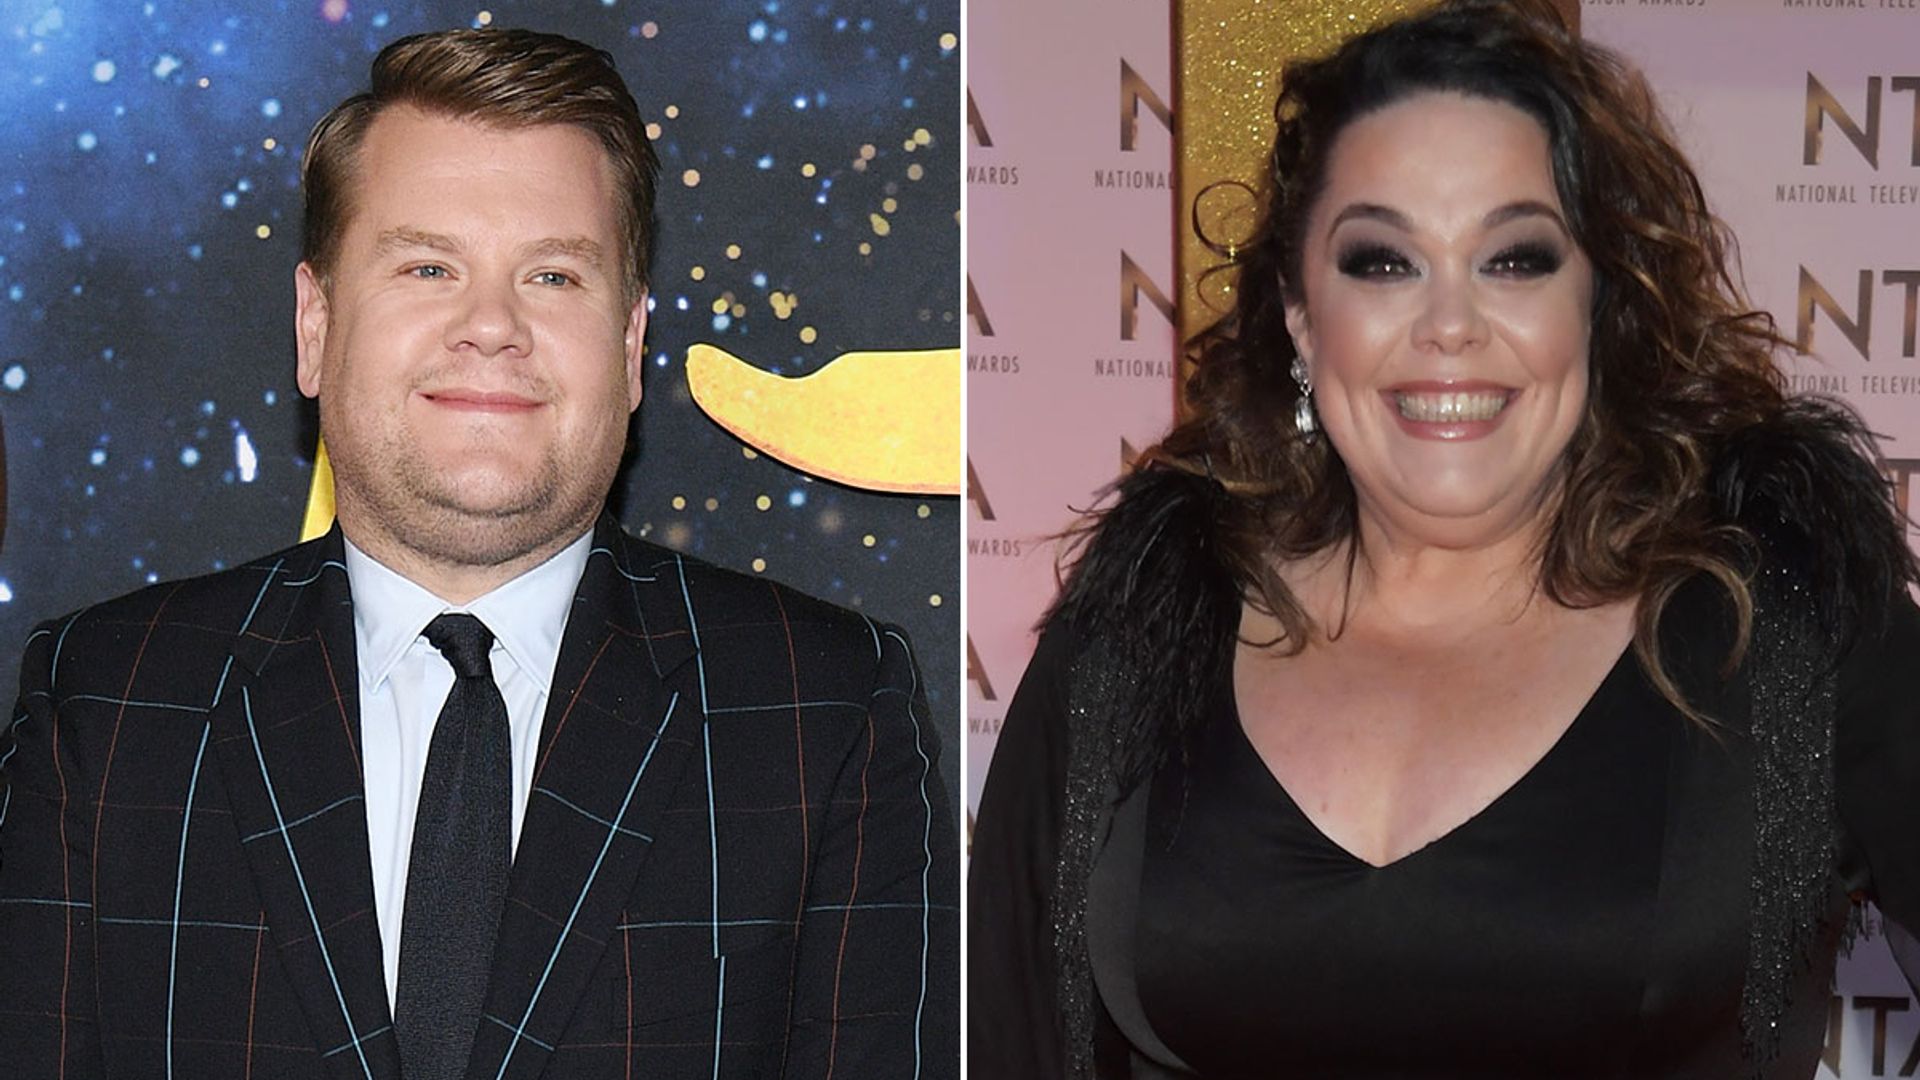 Lisa Riley shares never-before-seen throwback photo with James Corden